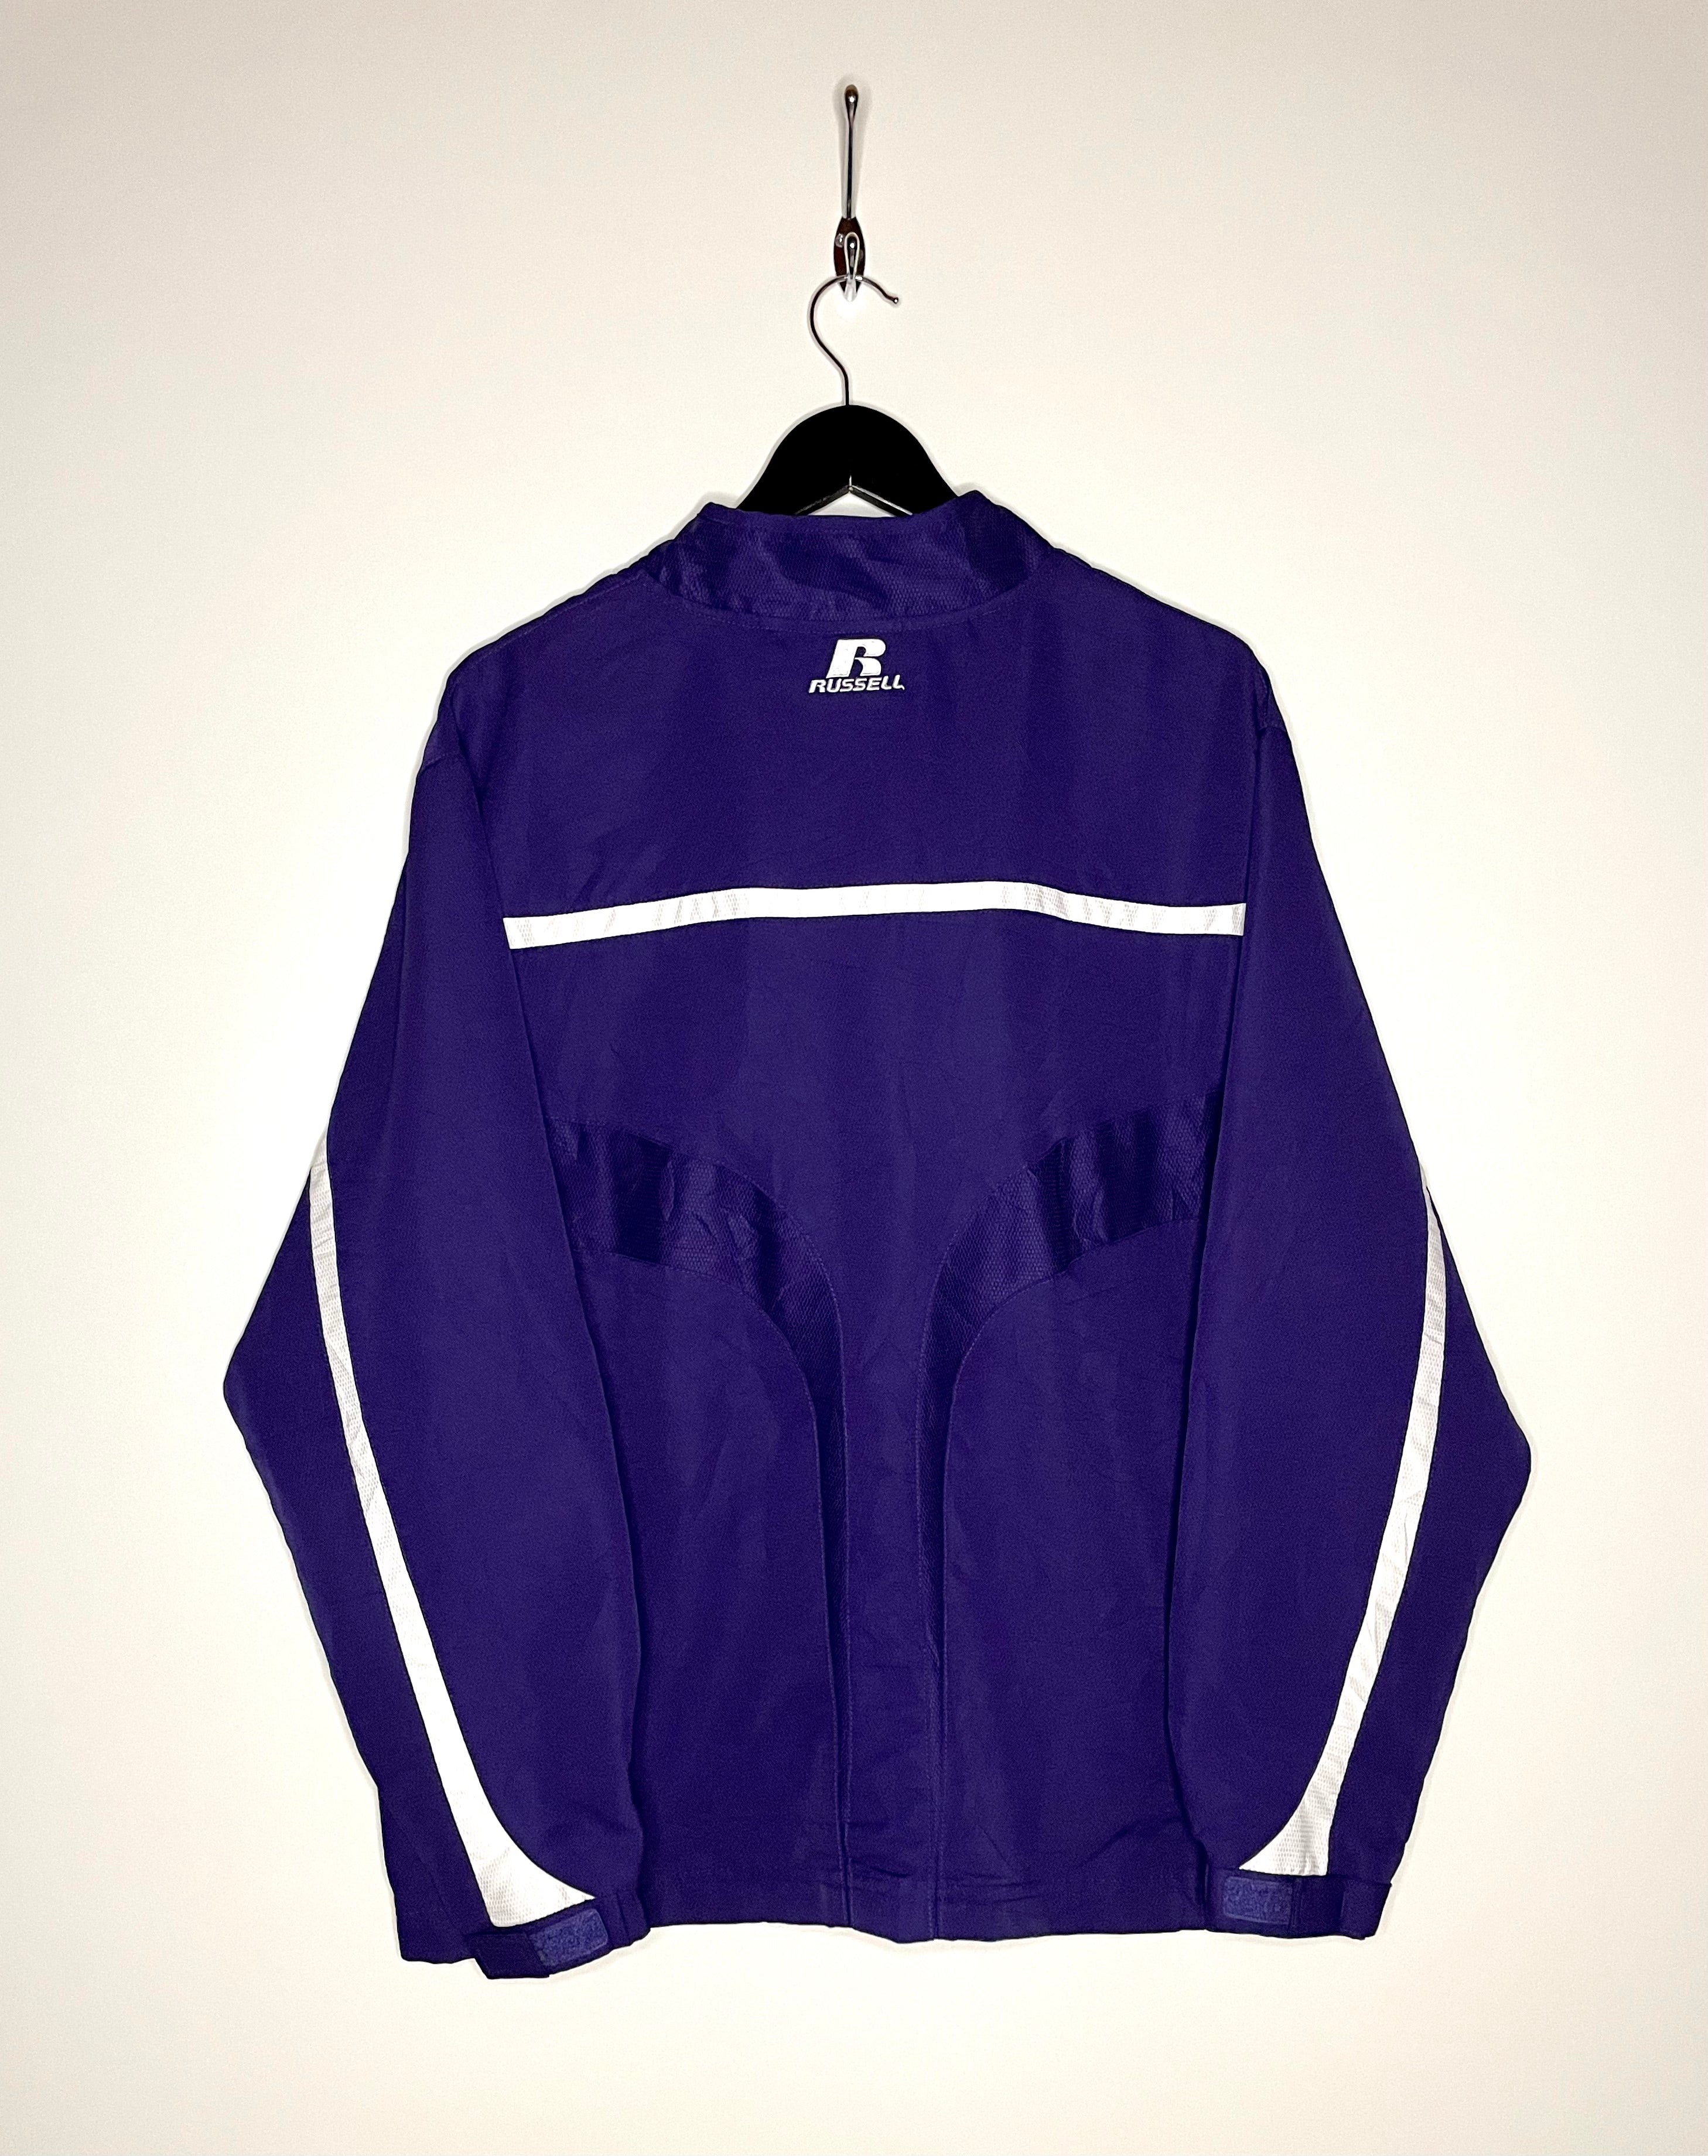 Russell Athletic Training Jacket Purple Size L 